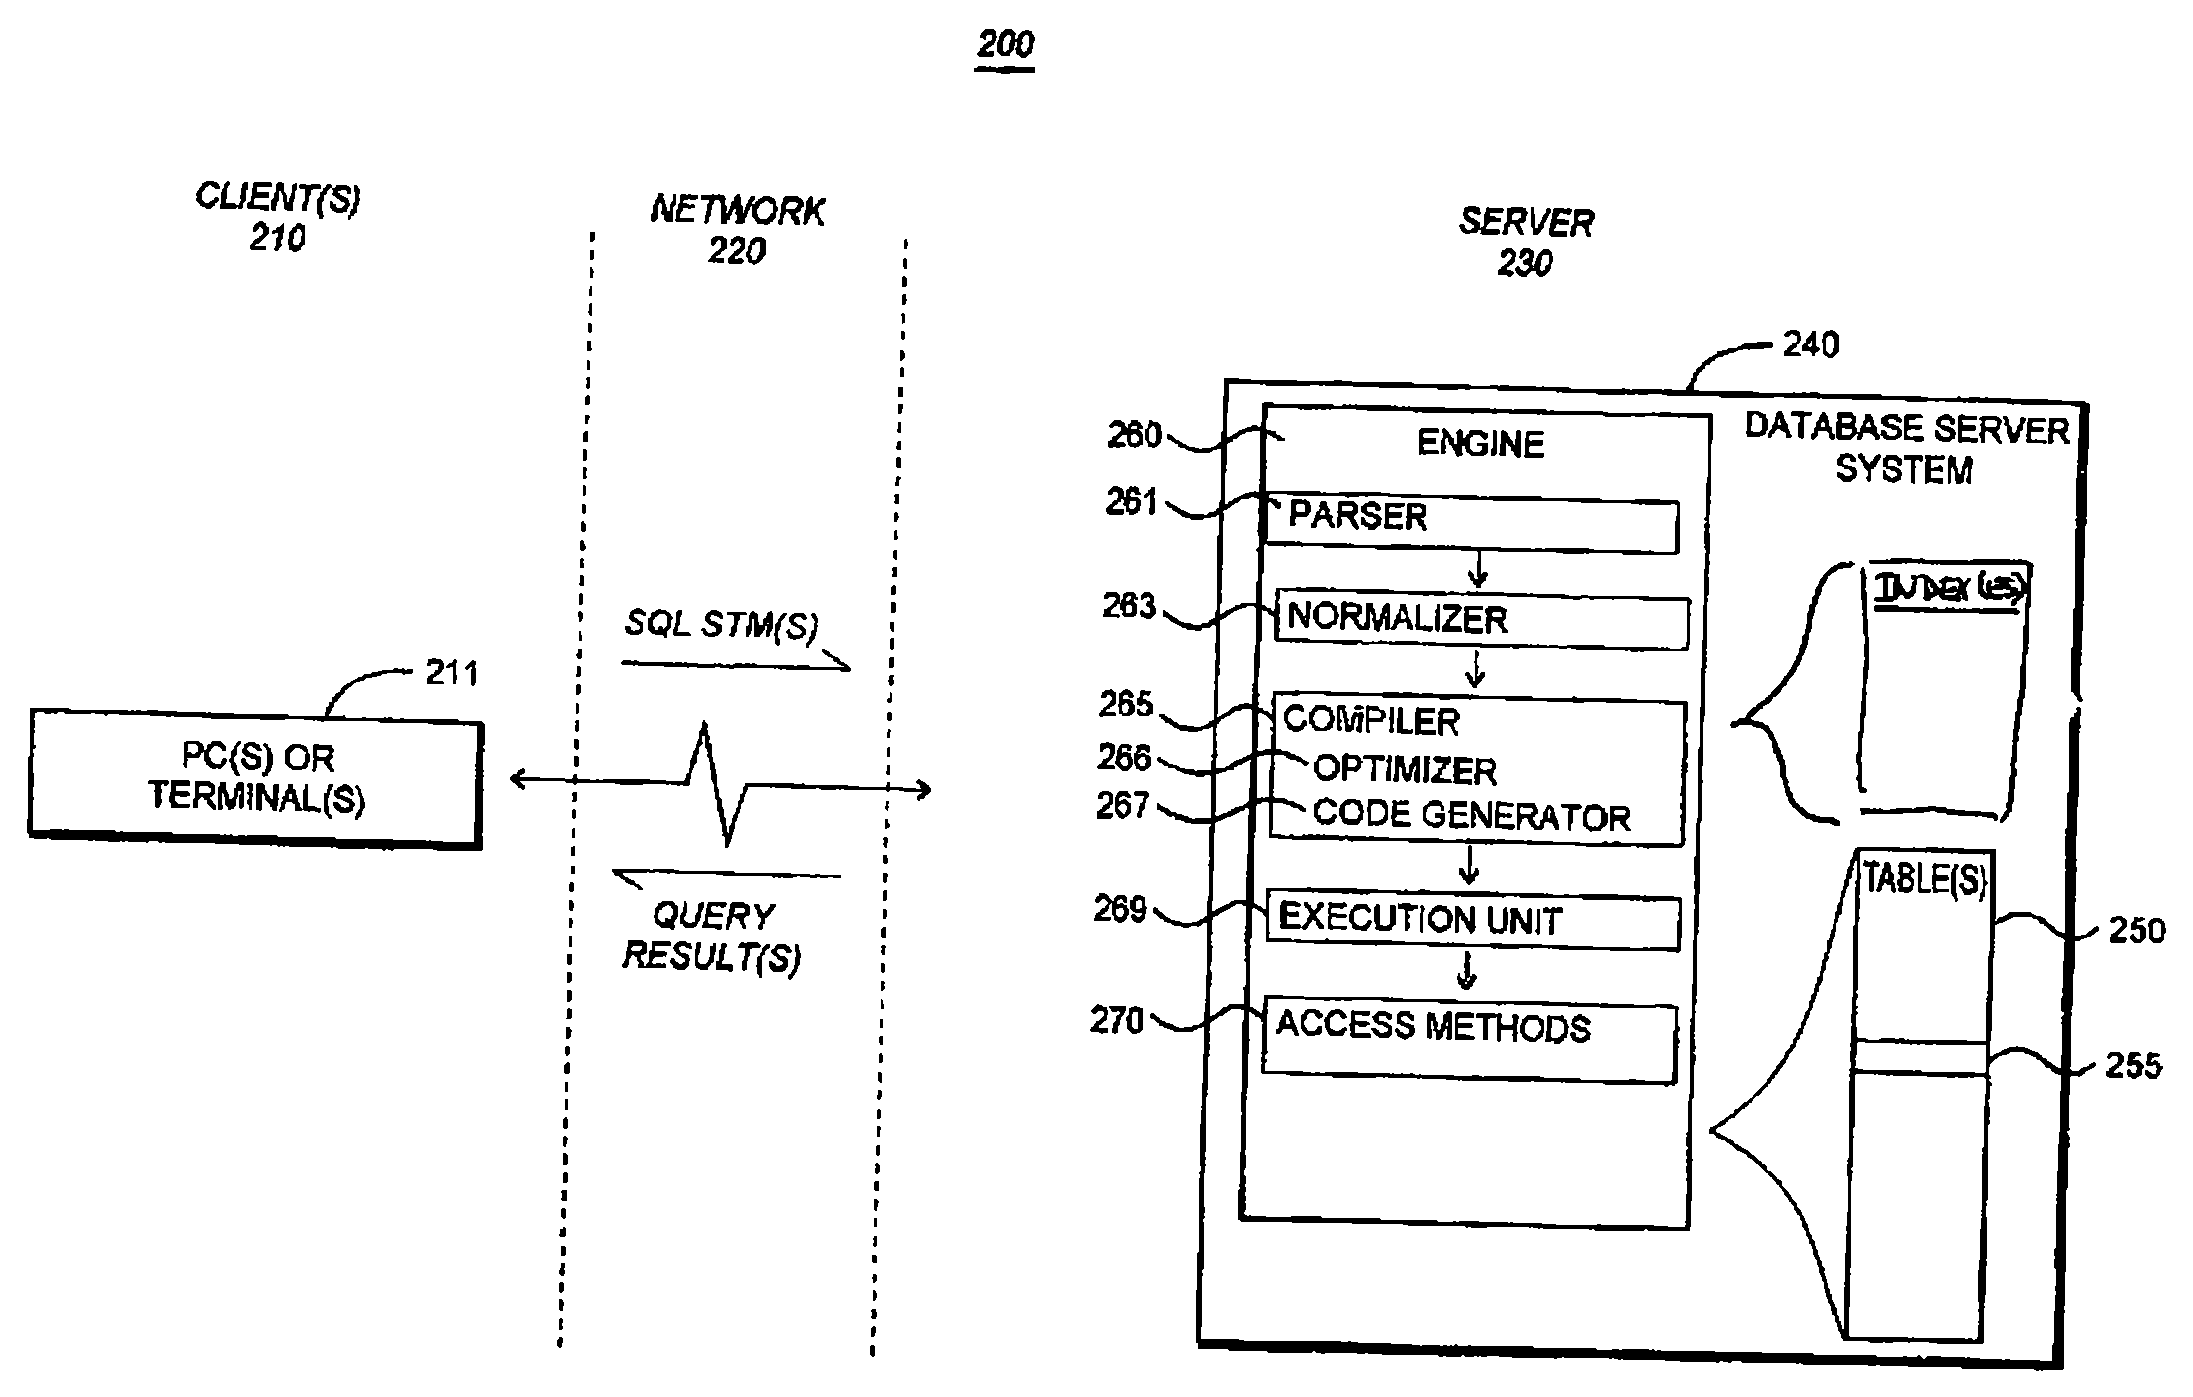 Data Compression For Reducing Storage Requirements in a Database System